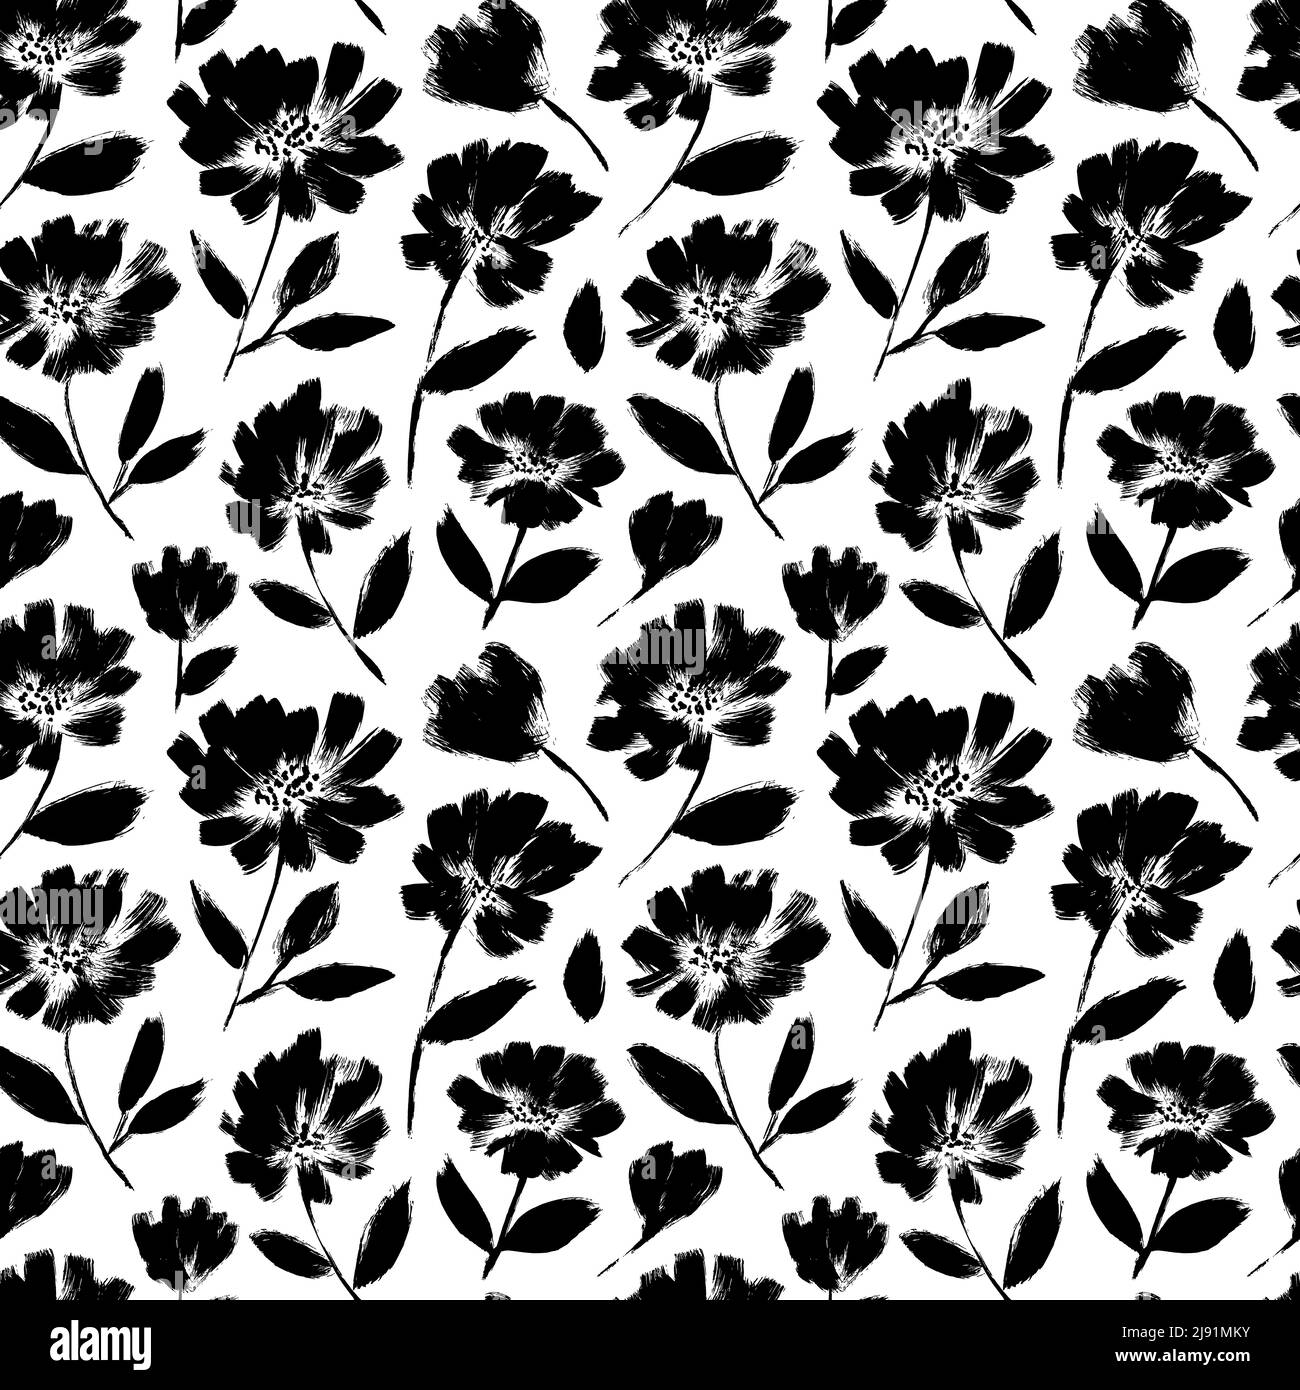 Ink drawing black flowers vector seamless pattern. Stock Vector